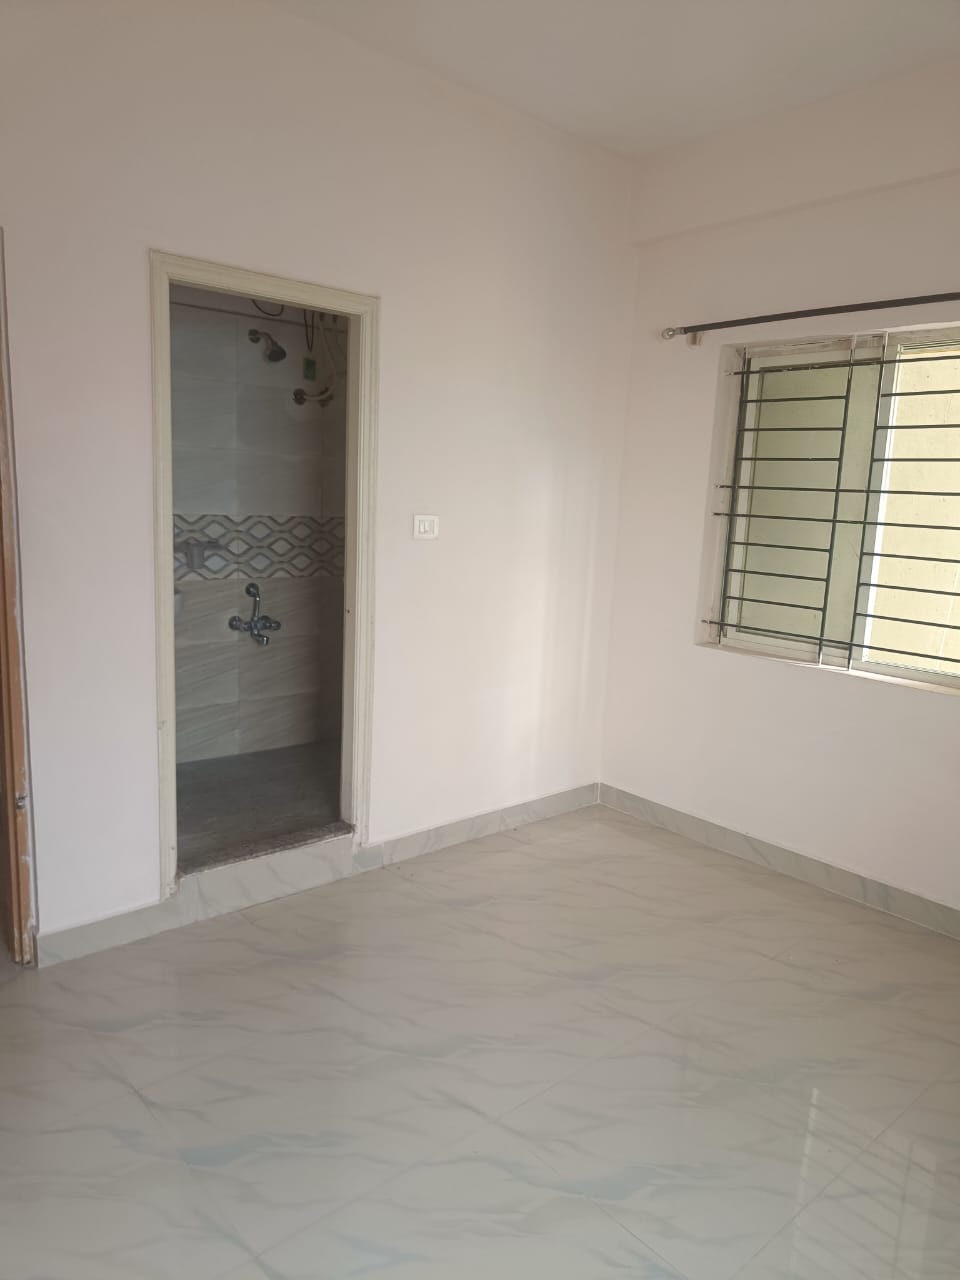 3 BHK Independent House for Lease Only at JAML2 - 4691-30lakh in Kaikondrahalli